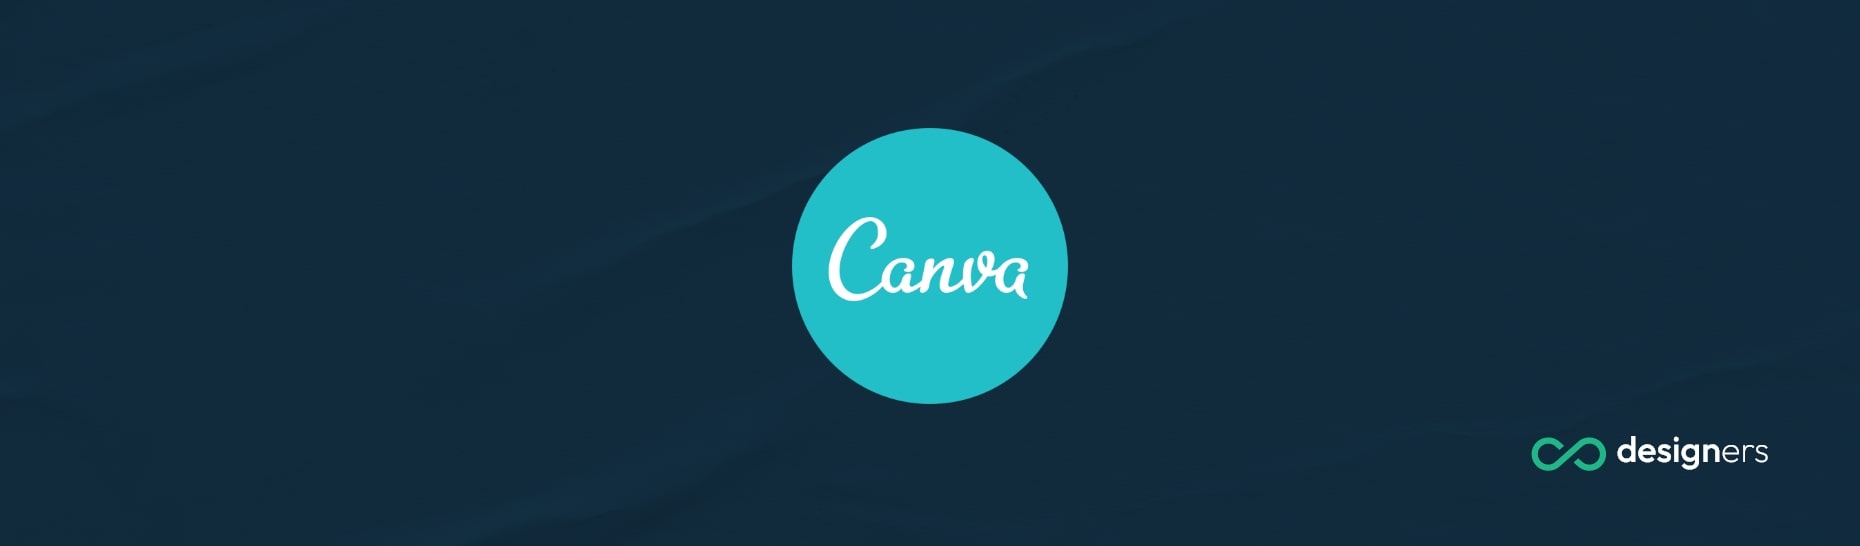 How Was Canva Founded?